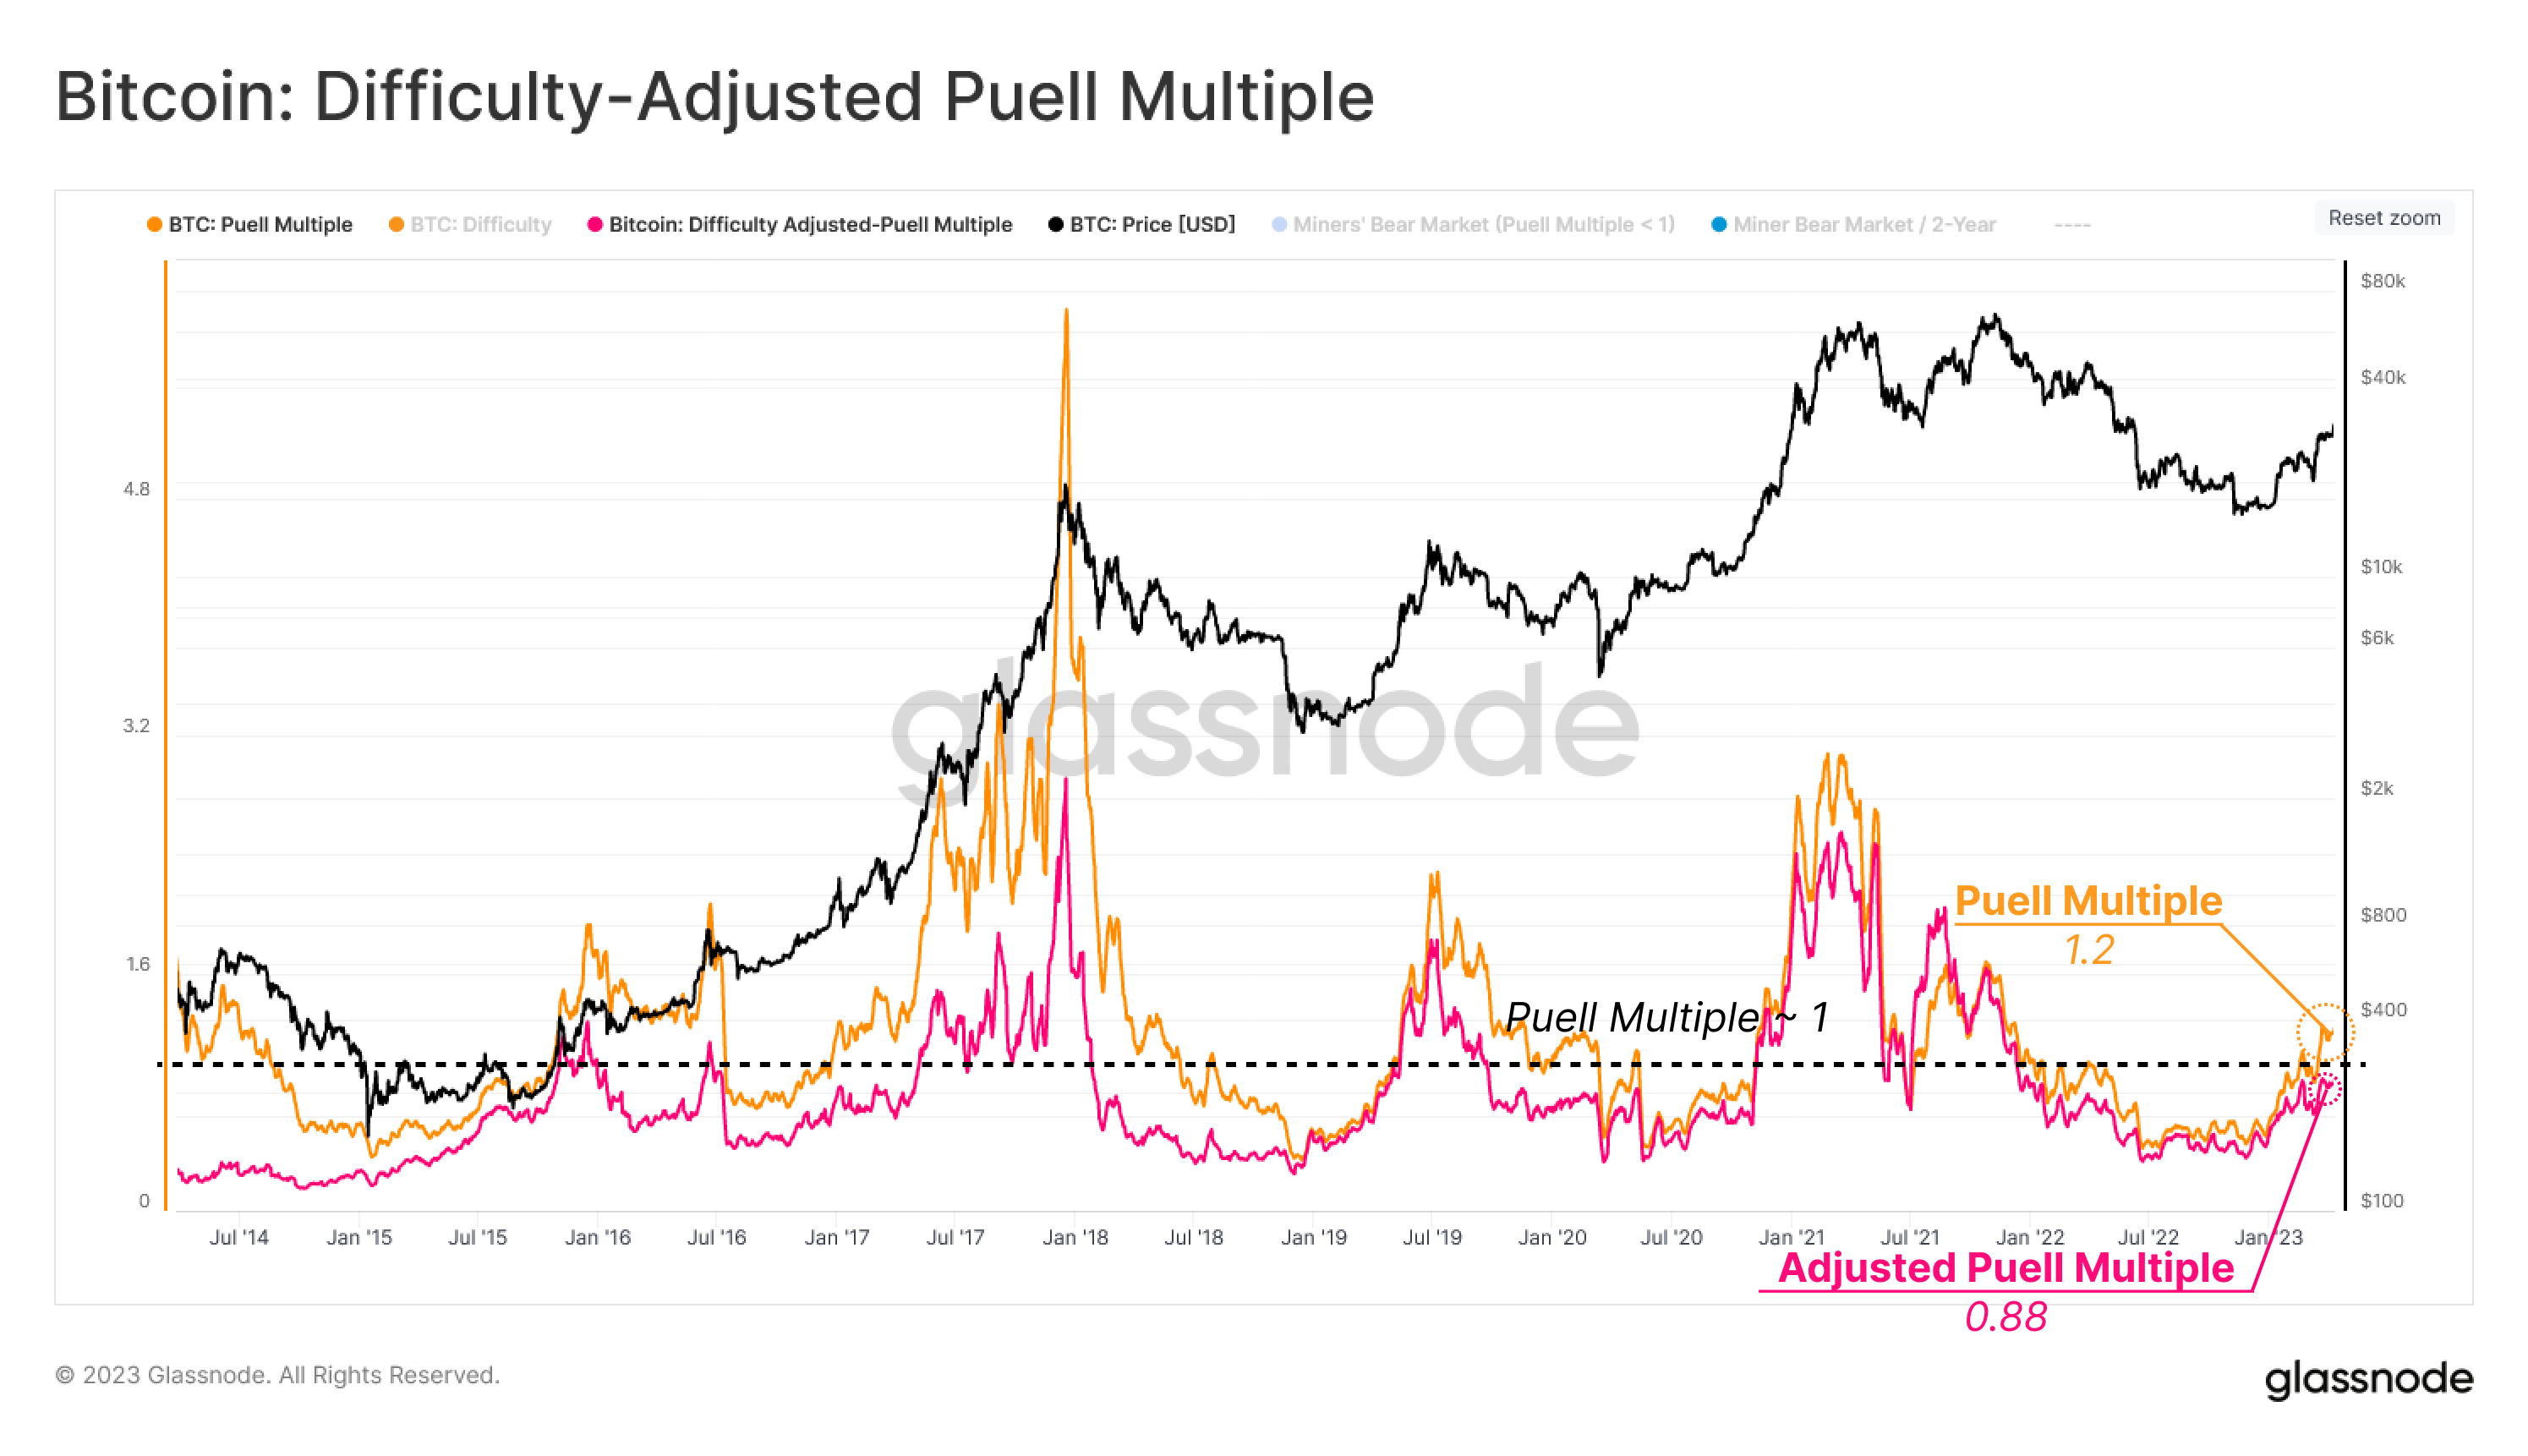 Bitcoin Difficulty-Adjusted Puell Multiple